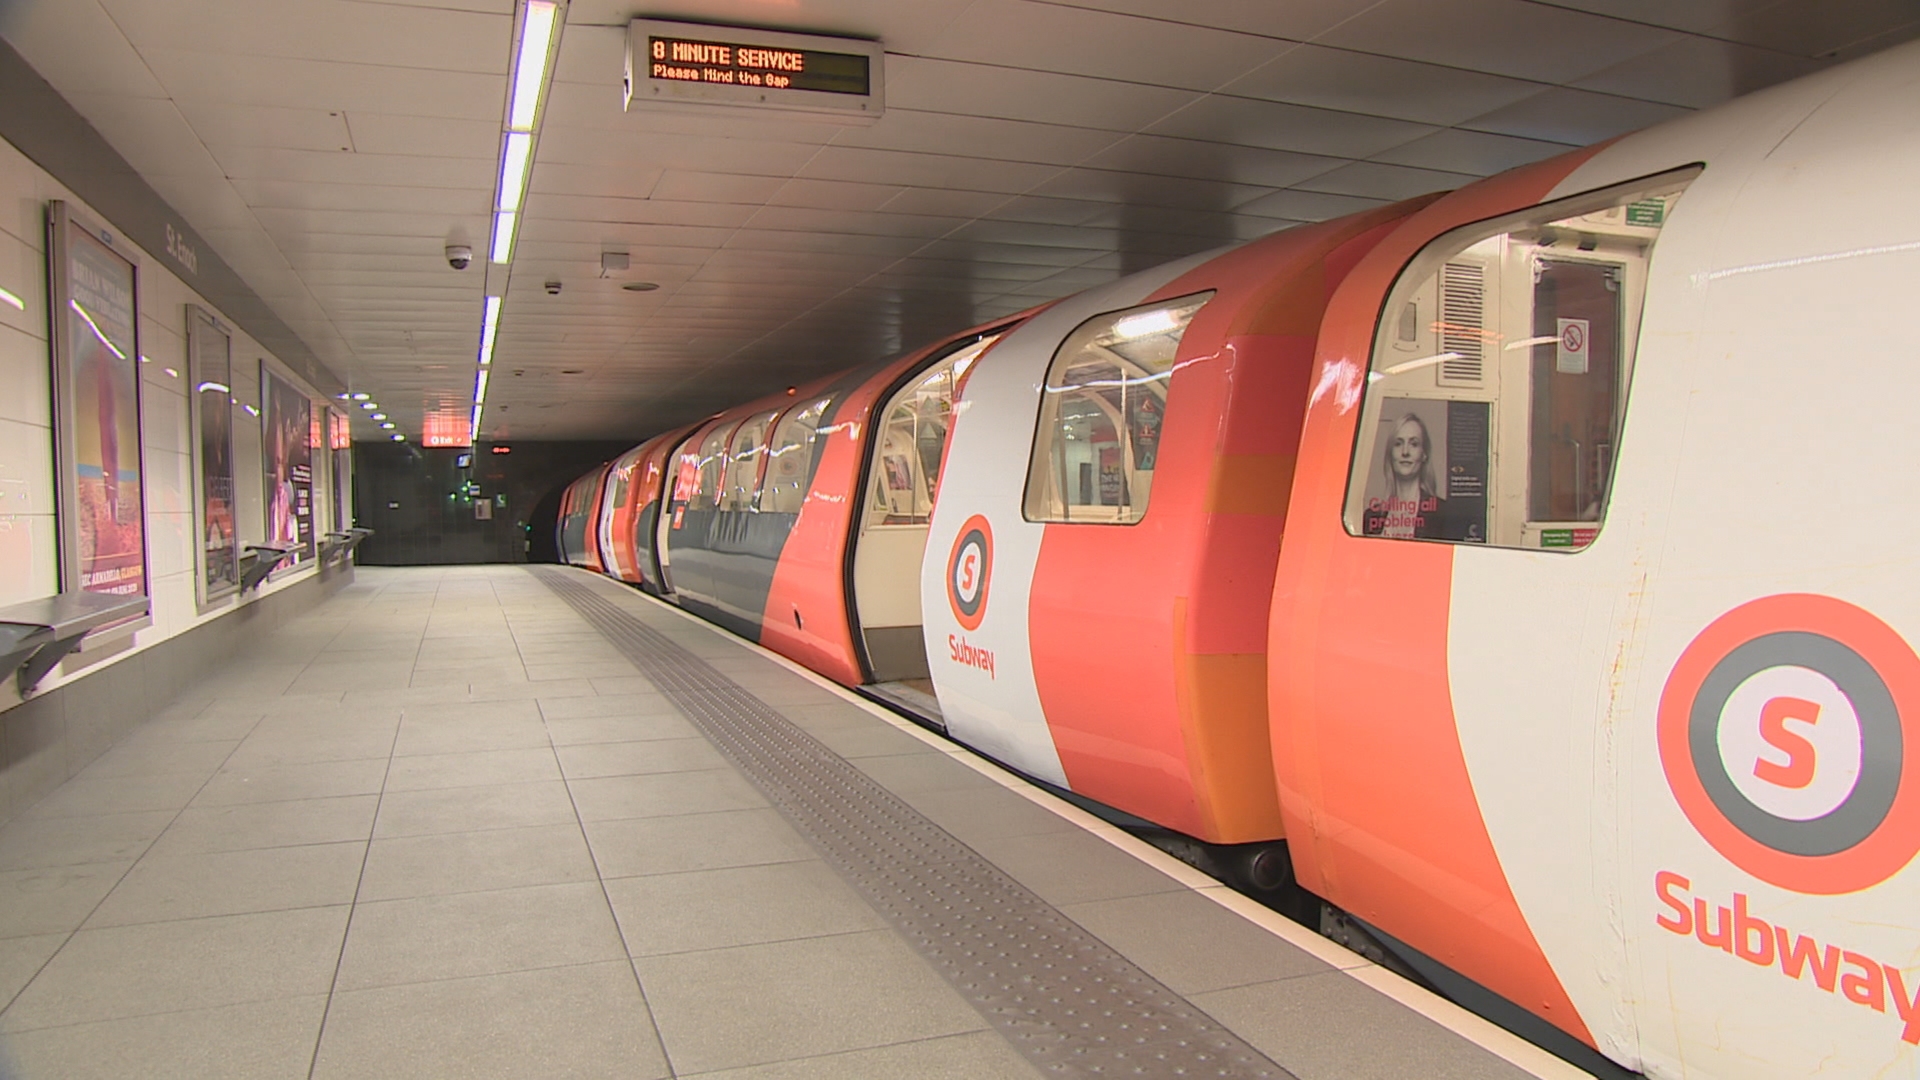 Work is being carried out to modernise the Subway system in Glasgow. (STV News) 